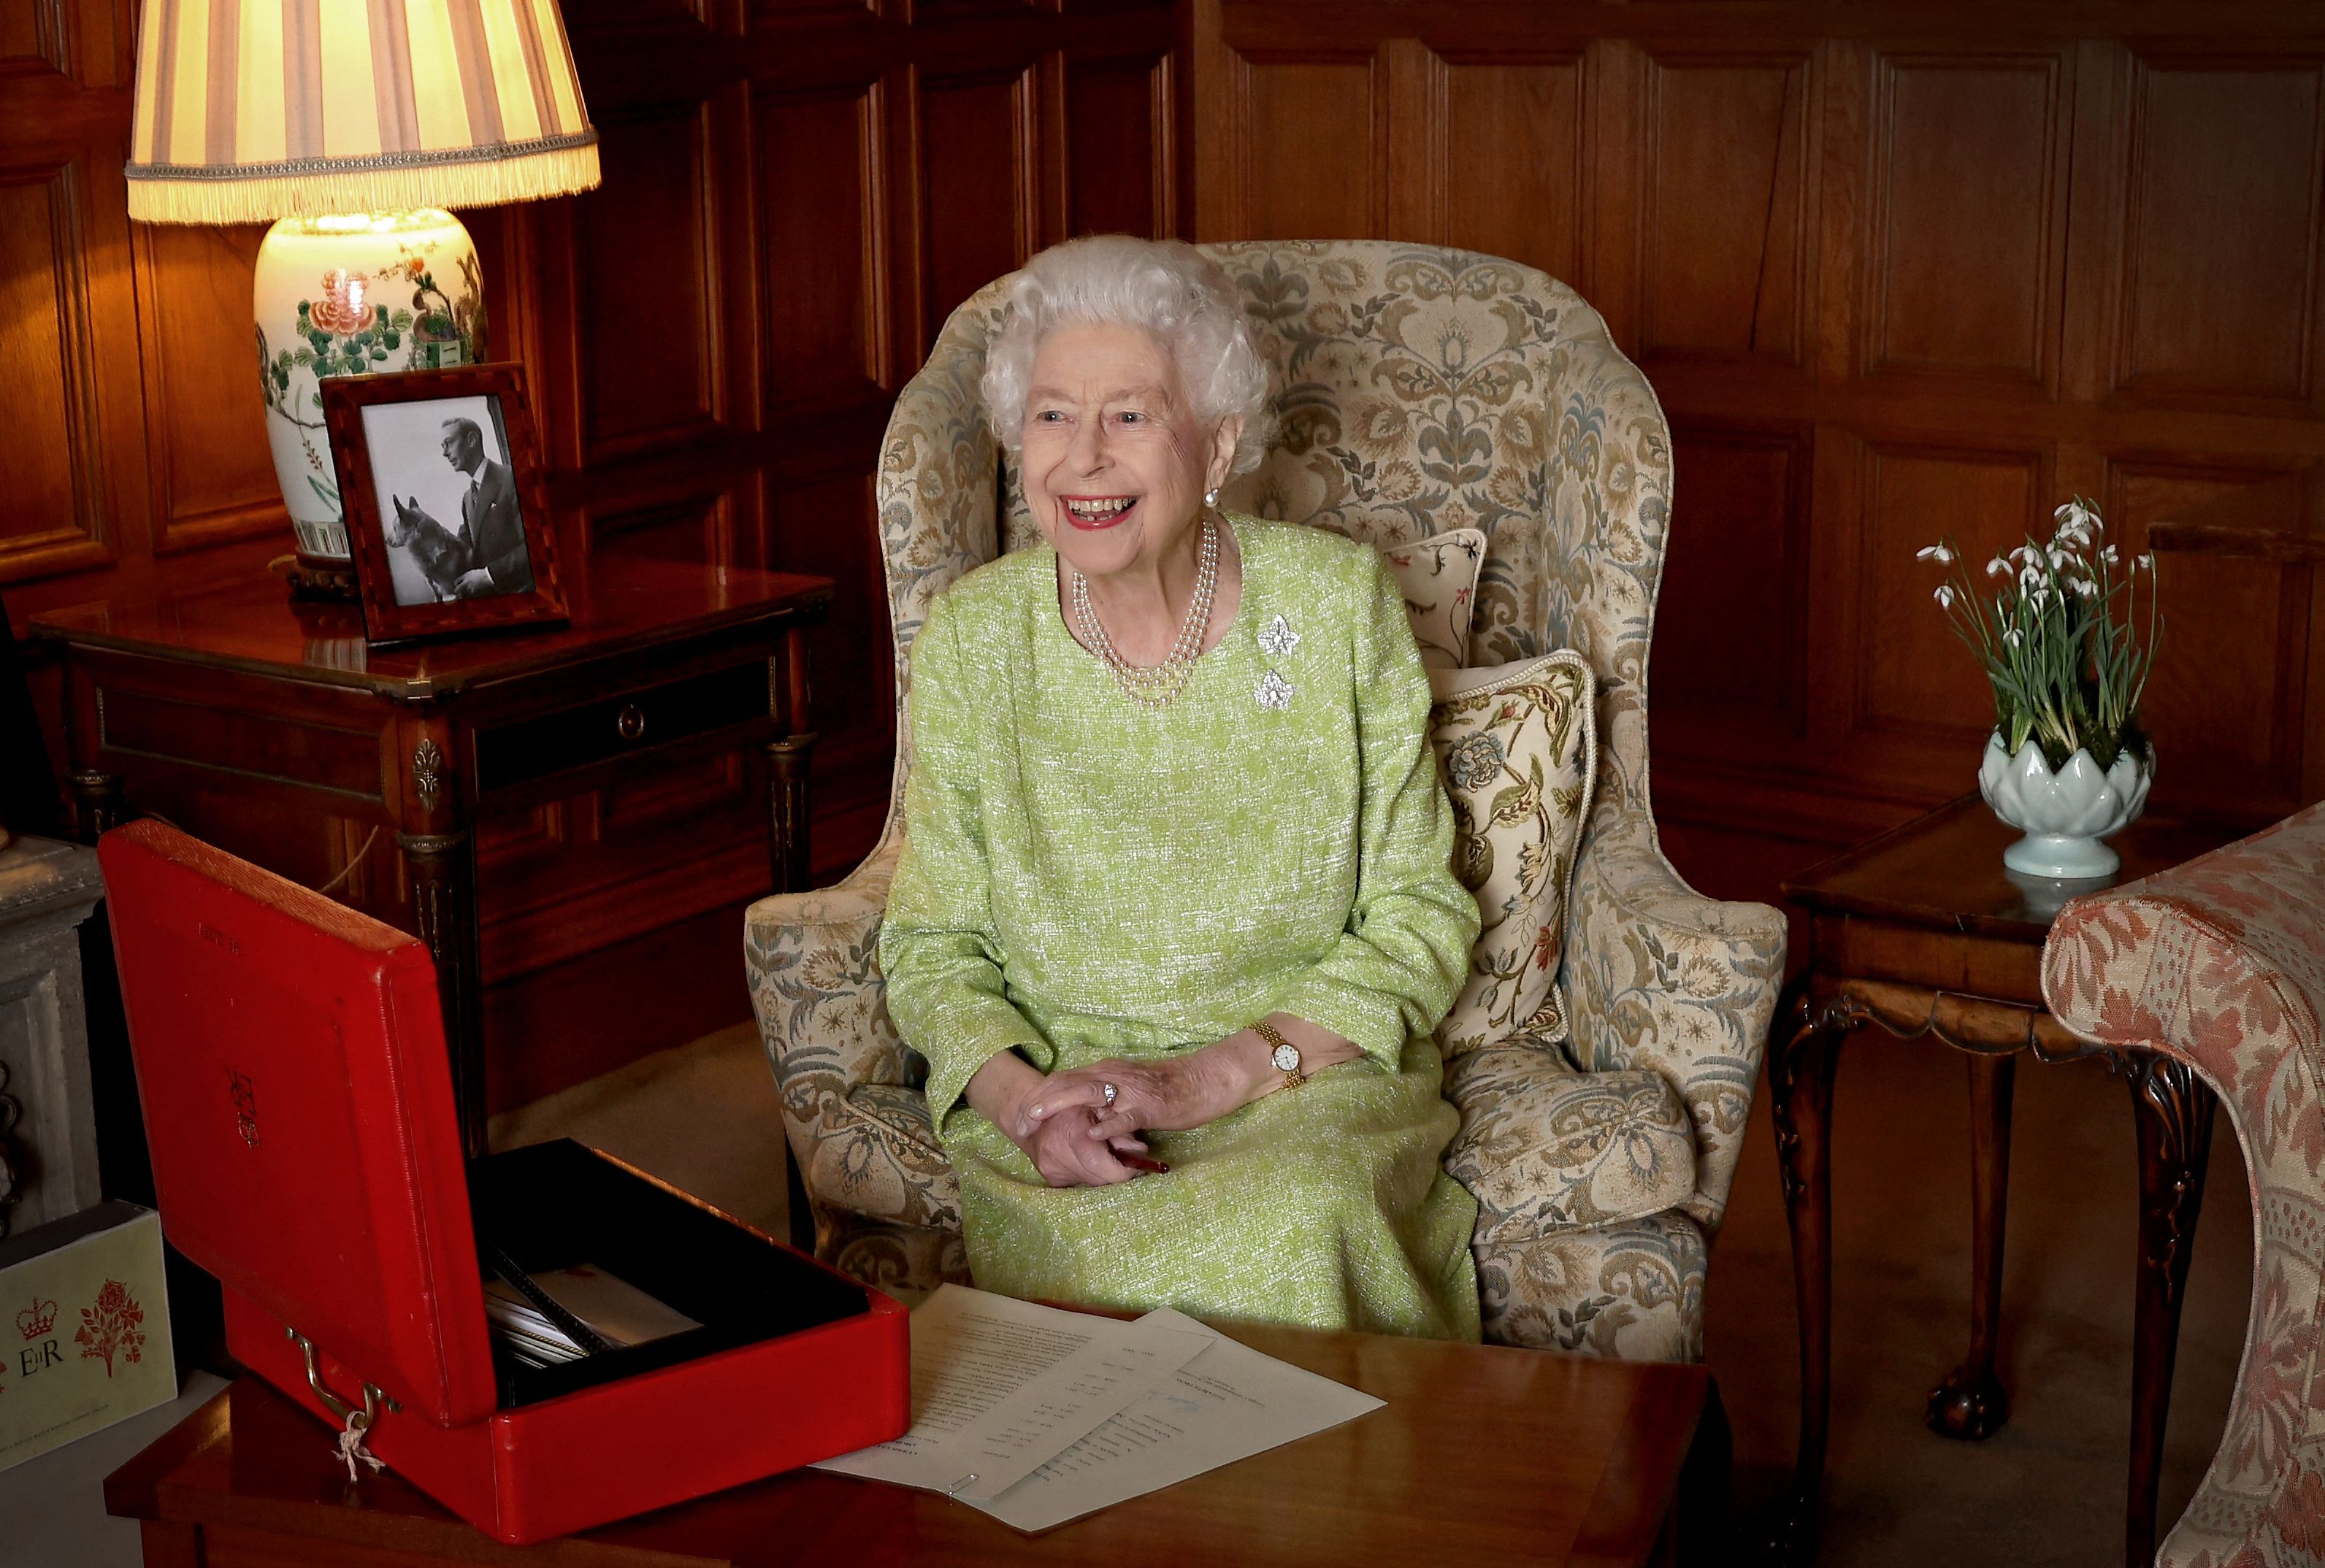 <p>Buckingham Palace released this image of Queen Elizabeth II on Feb. 6, 2022 -- her Accession Day marking 70 years on the throne and the start of her Platinum Jubilee year -- showing her smiling as she worked on papers from her iconic red box inside Sandringham House in Norfolk, England, on Feb. 2, 2022. Accession Day, she wrote in a letter released on the eve of the anniversary, "is a day that, even after 70 years, I still remember as much for the death of my father, King George VI, as for the start of my reign." </p>